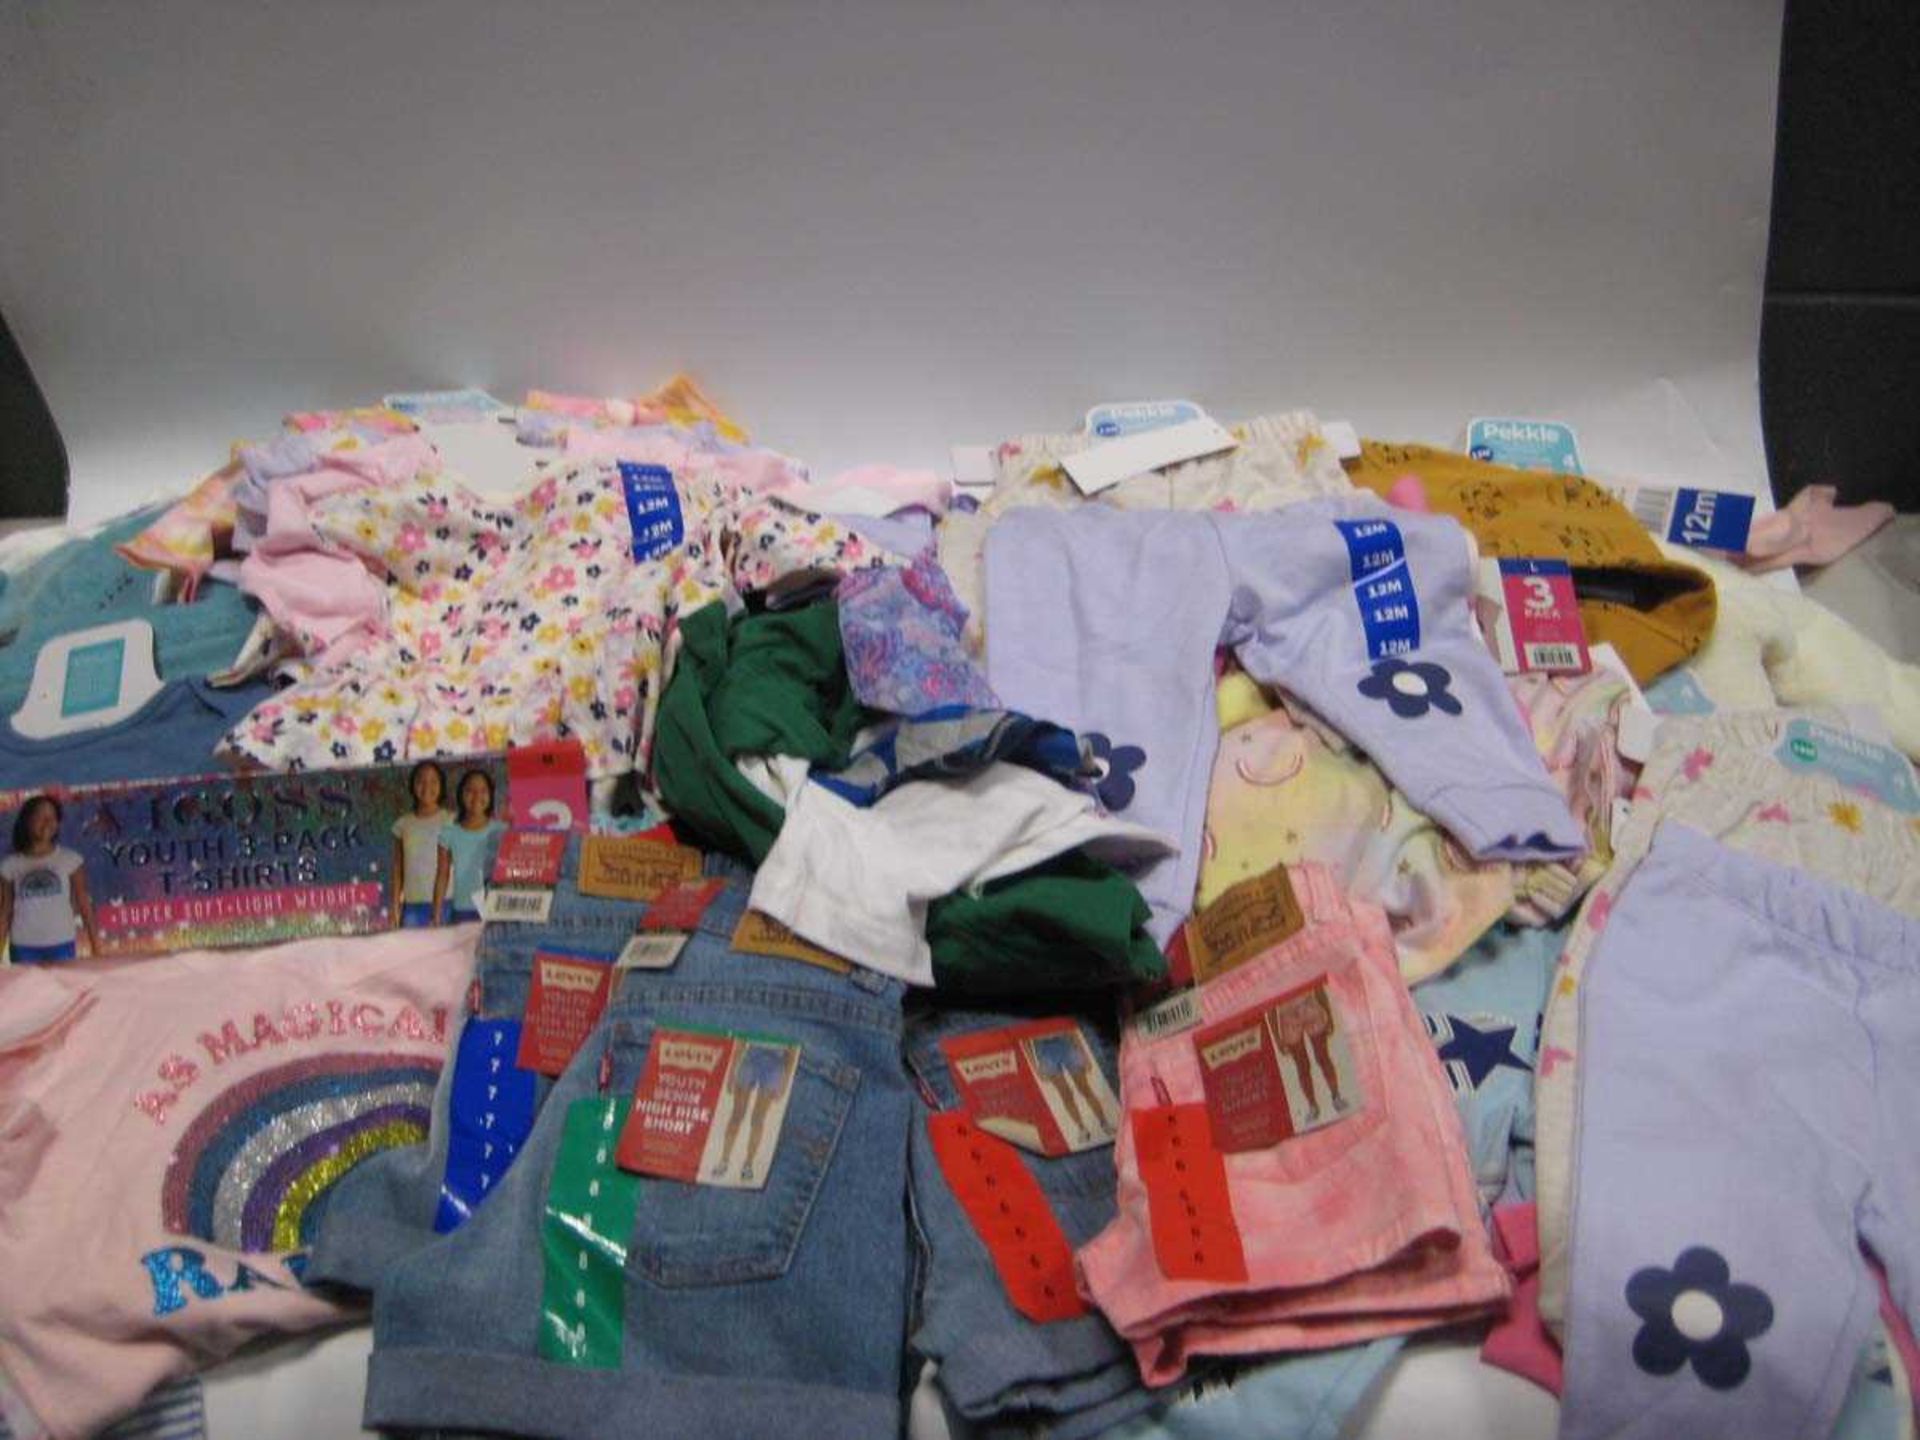 A bag containing Children's Clothing in various styles and sizes, including Levis